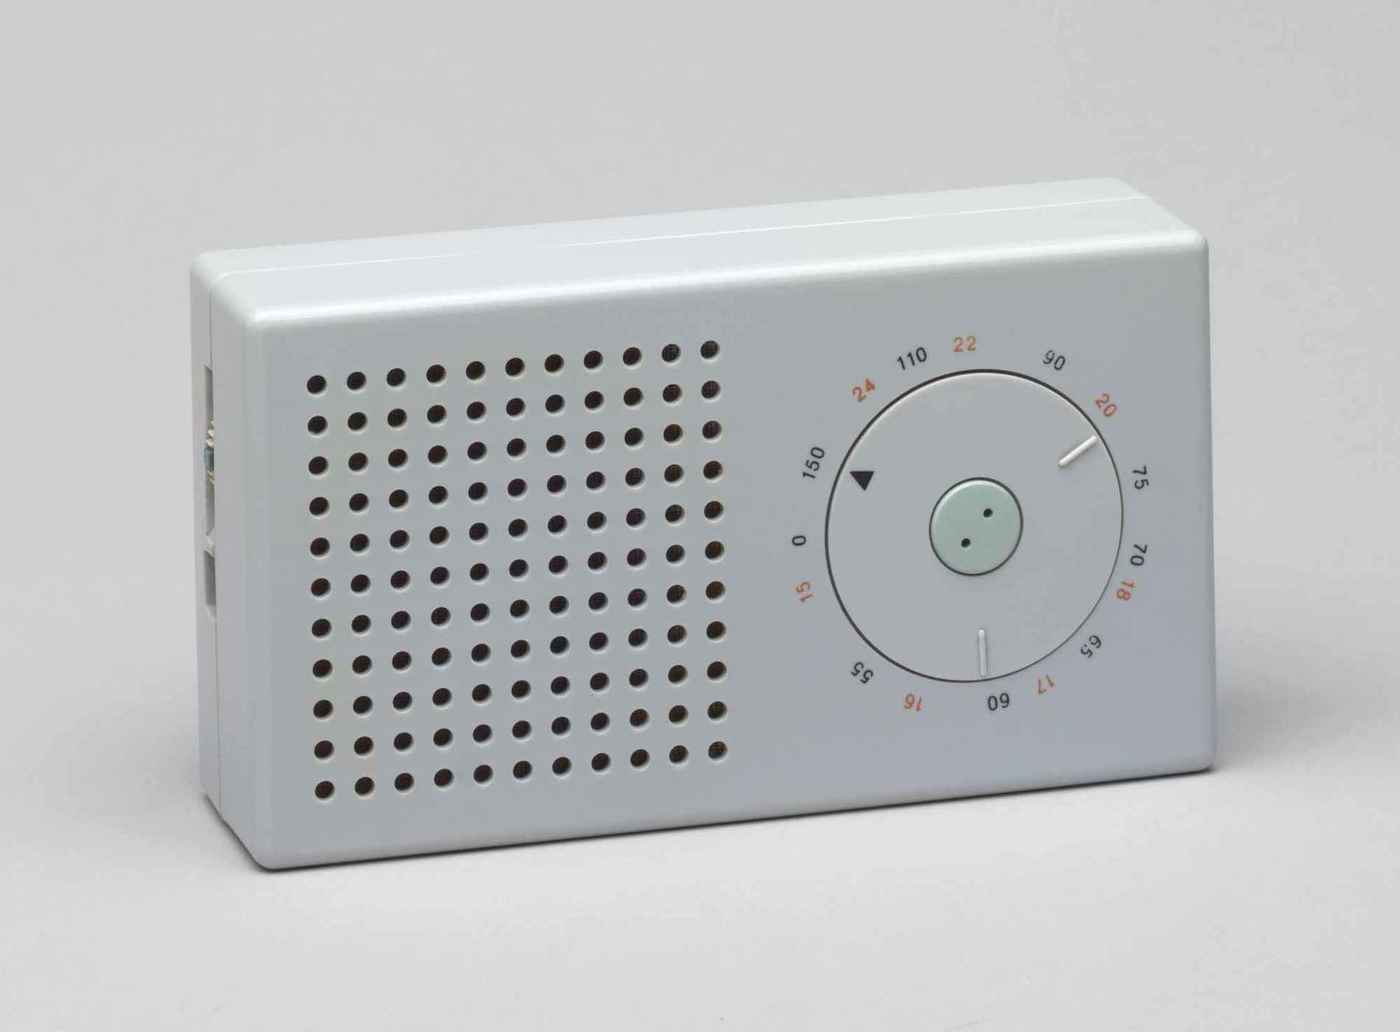 The iconic Braun T3 pocket transistor radio, designed by Dieter Rams (1958; MoMA photo); though somewhat faded, the red (one of only 3 colors on the device) numerals still clearly denote longwave radio frequencies (black for medium wave length). It strikingly resembles the Apple iPod, which, however, is all-white.